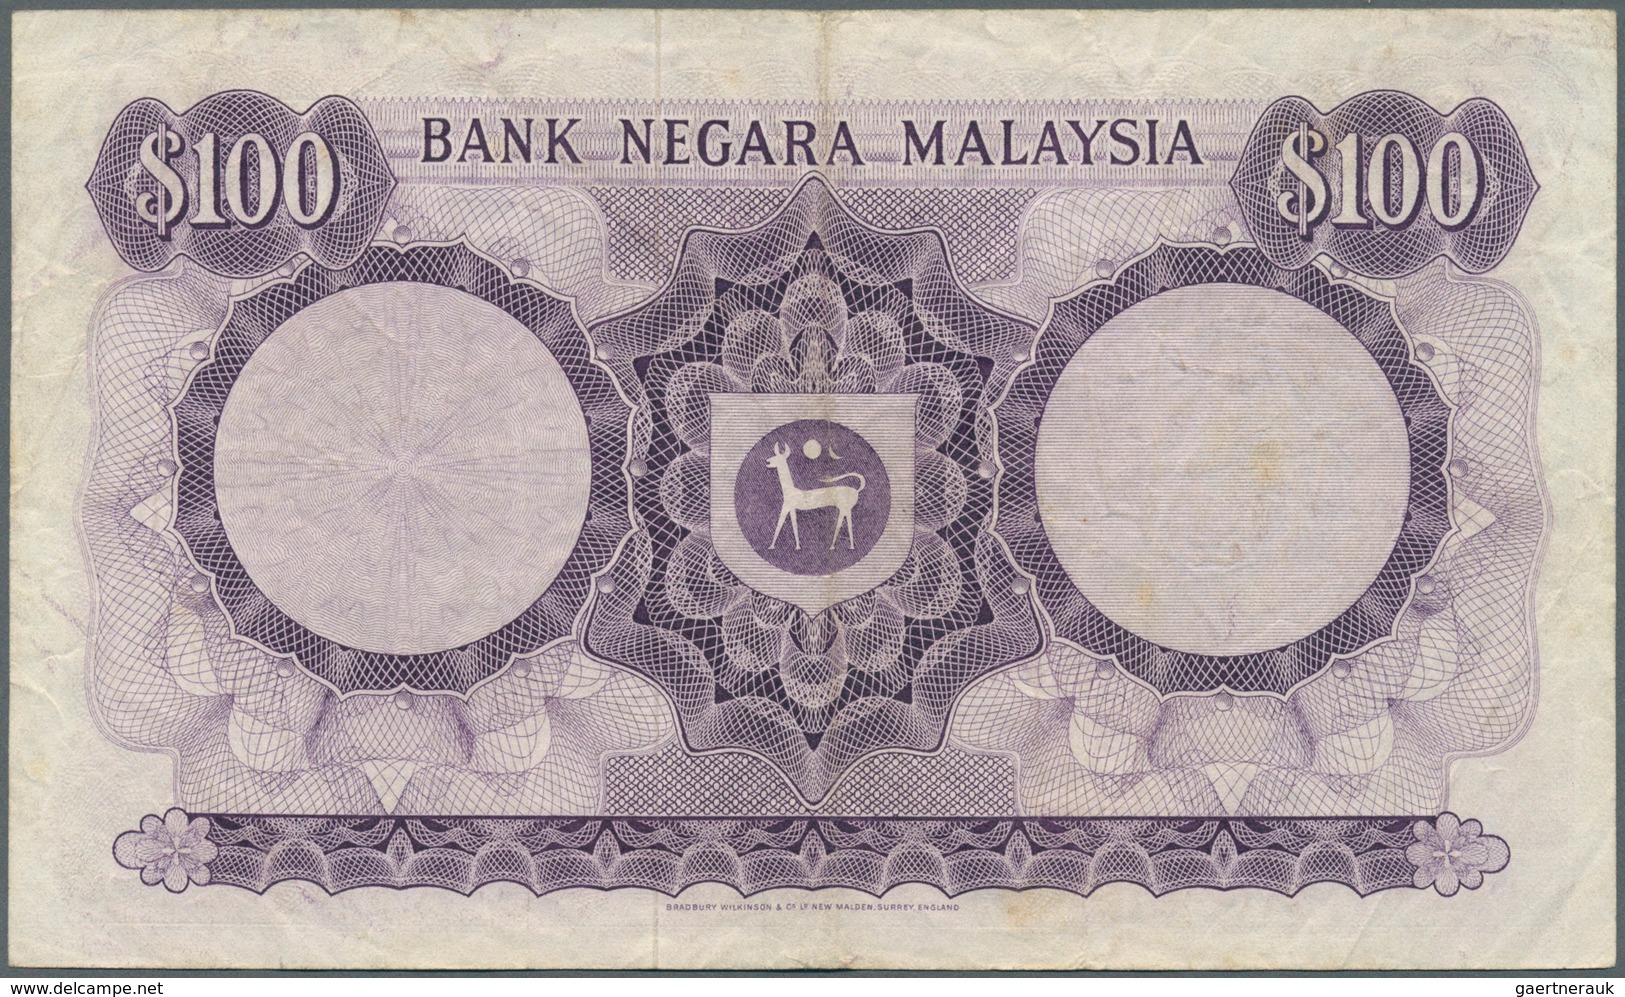 01991 Malaysia: Bank Negara Malaysia 100 Ringgit ND(1976-81), P.17, Still Nice And Attractive Note With A - Malesia